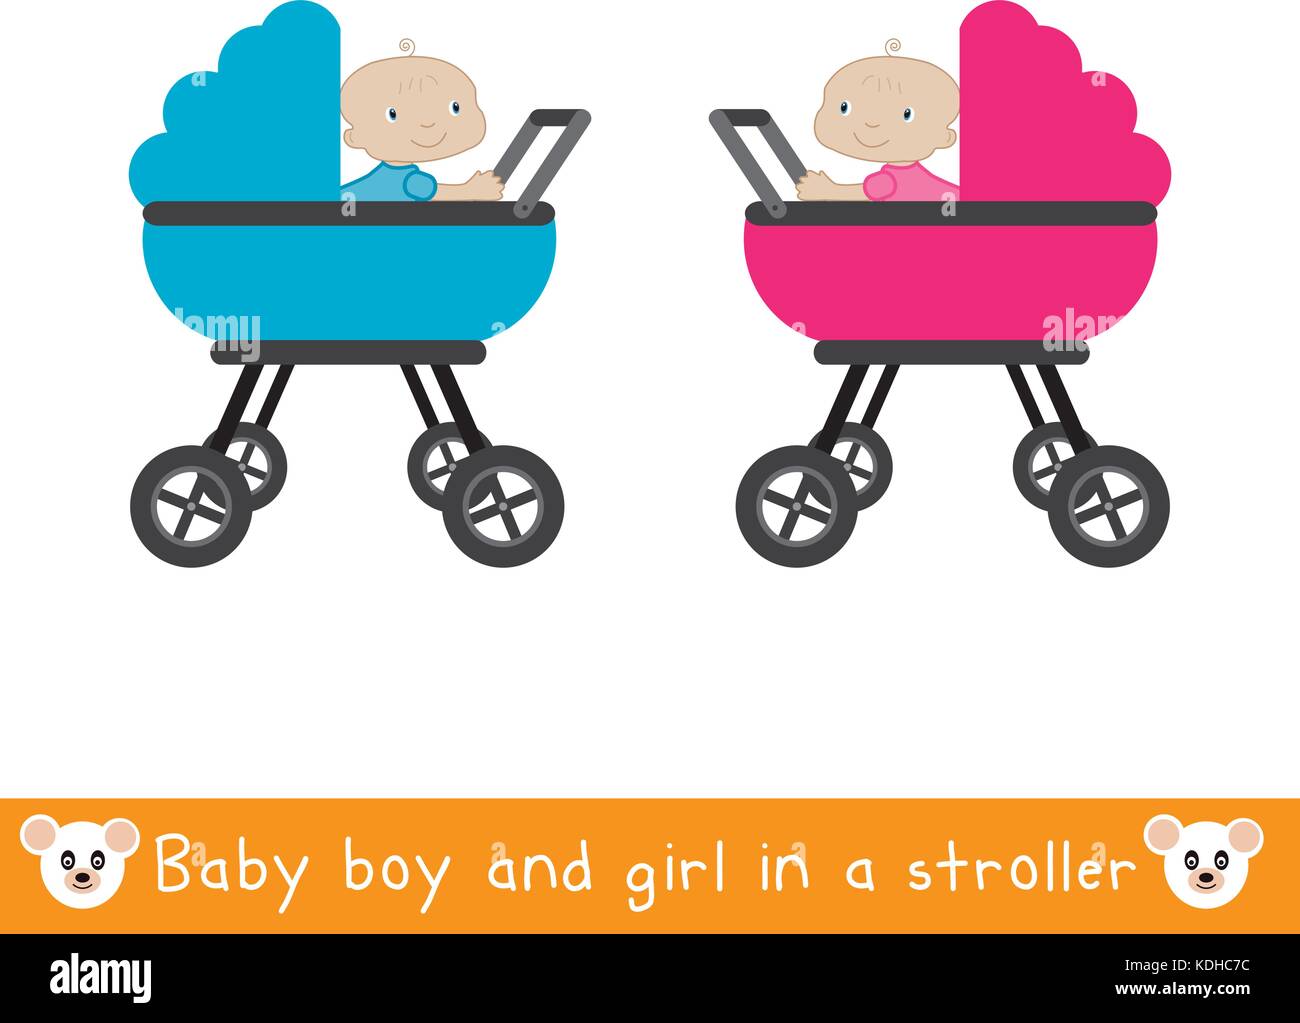 Boy and girl in a stroller Stock Vector